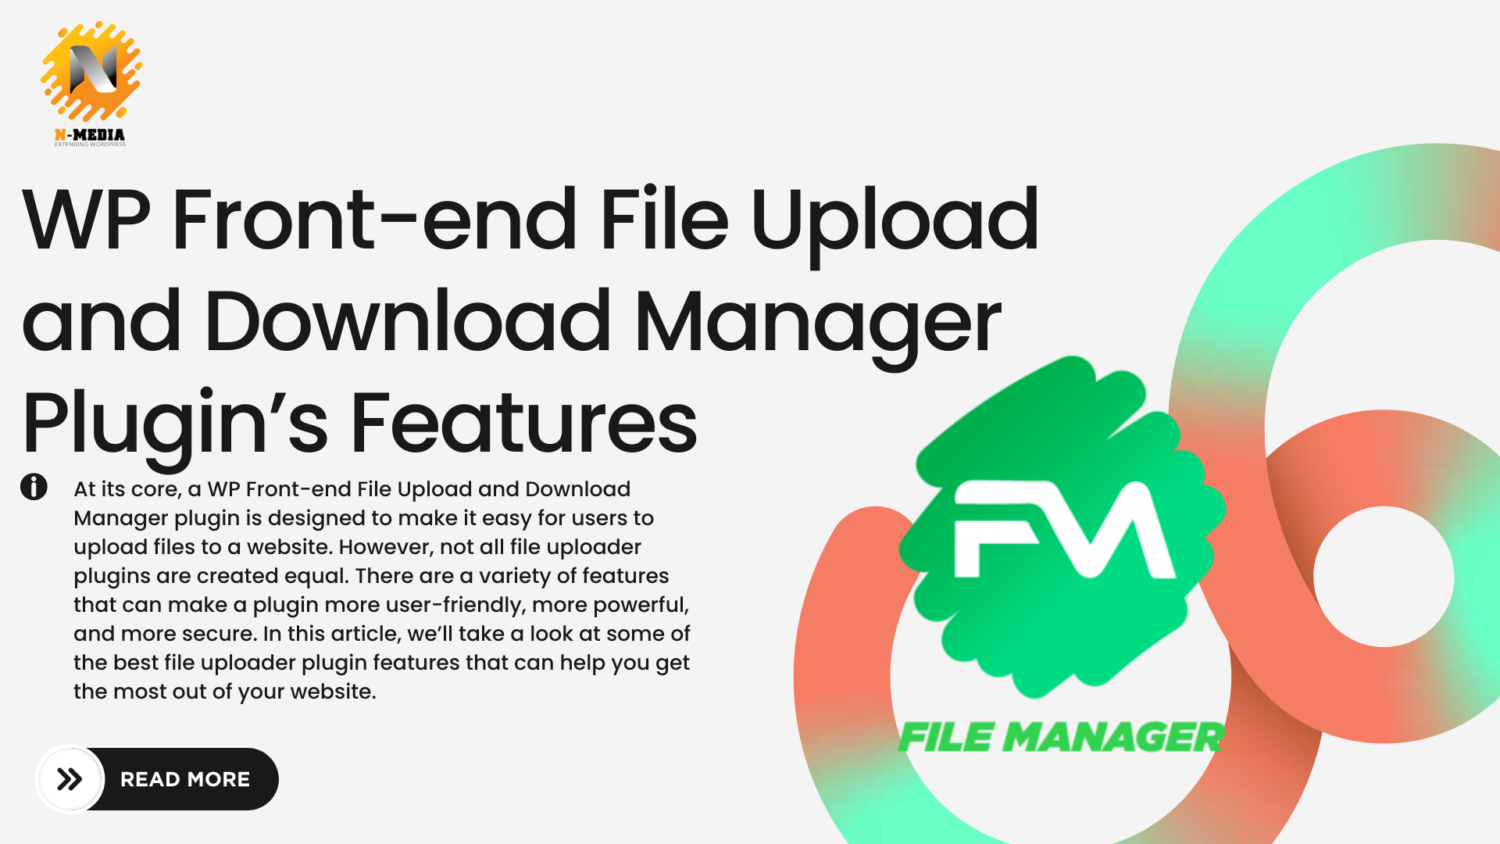 WP Front-end File Upload and Download Manager Plugin’s Features: